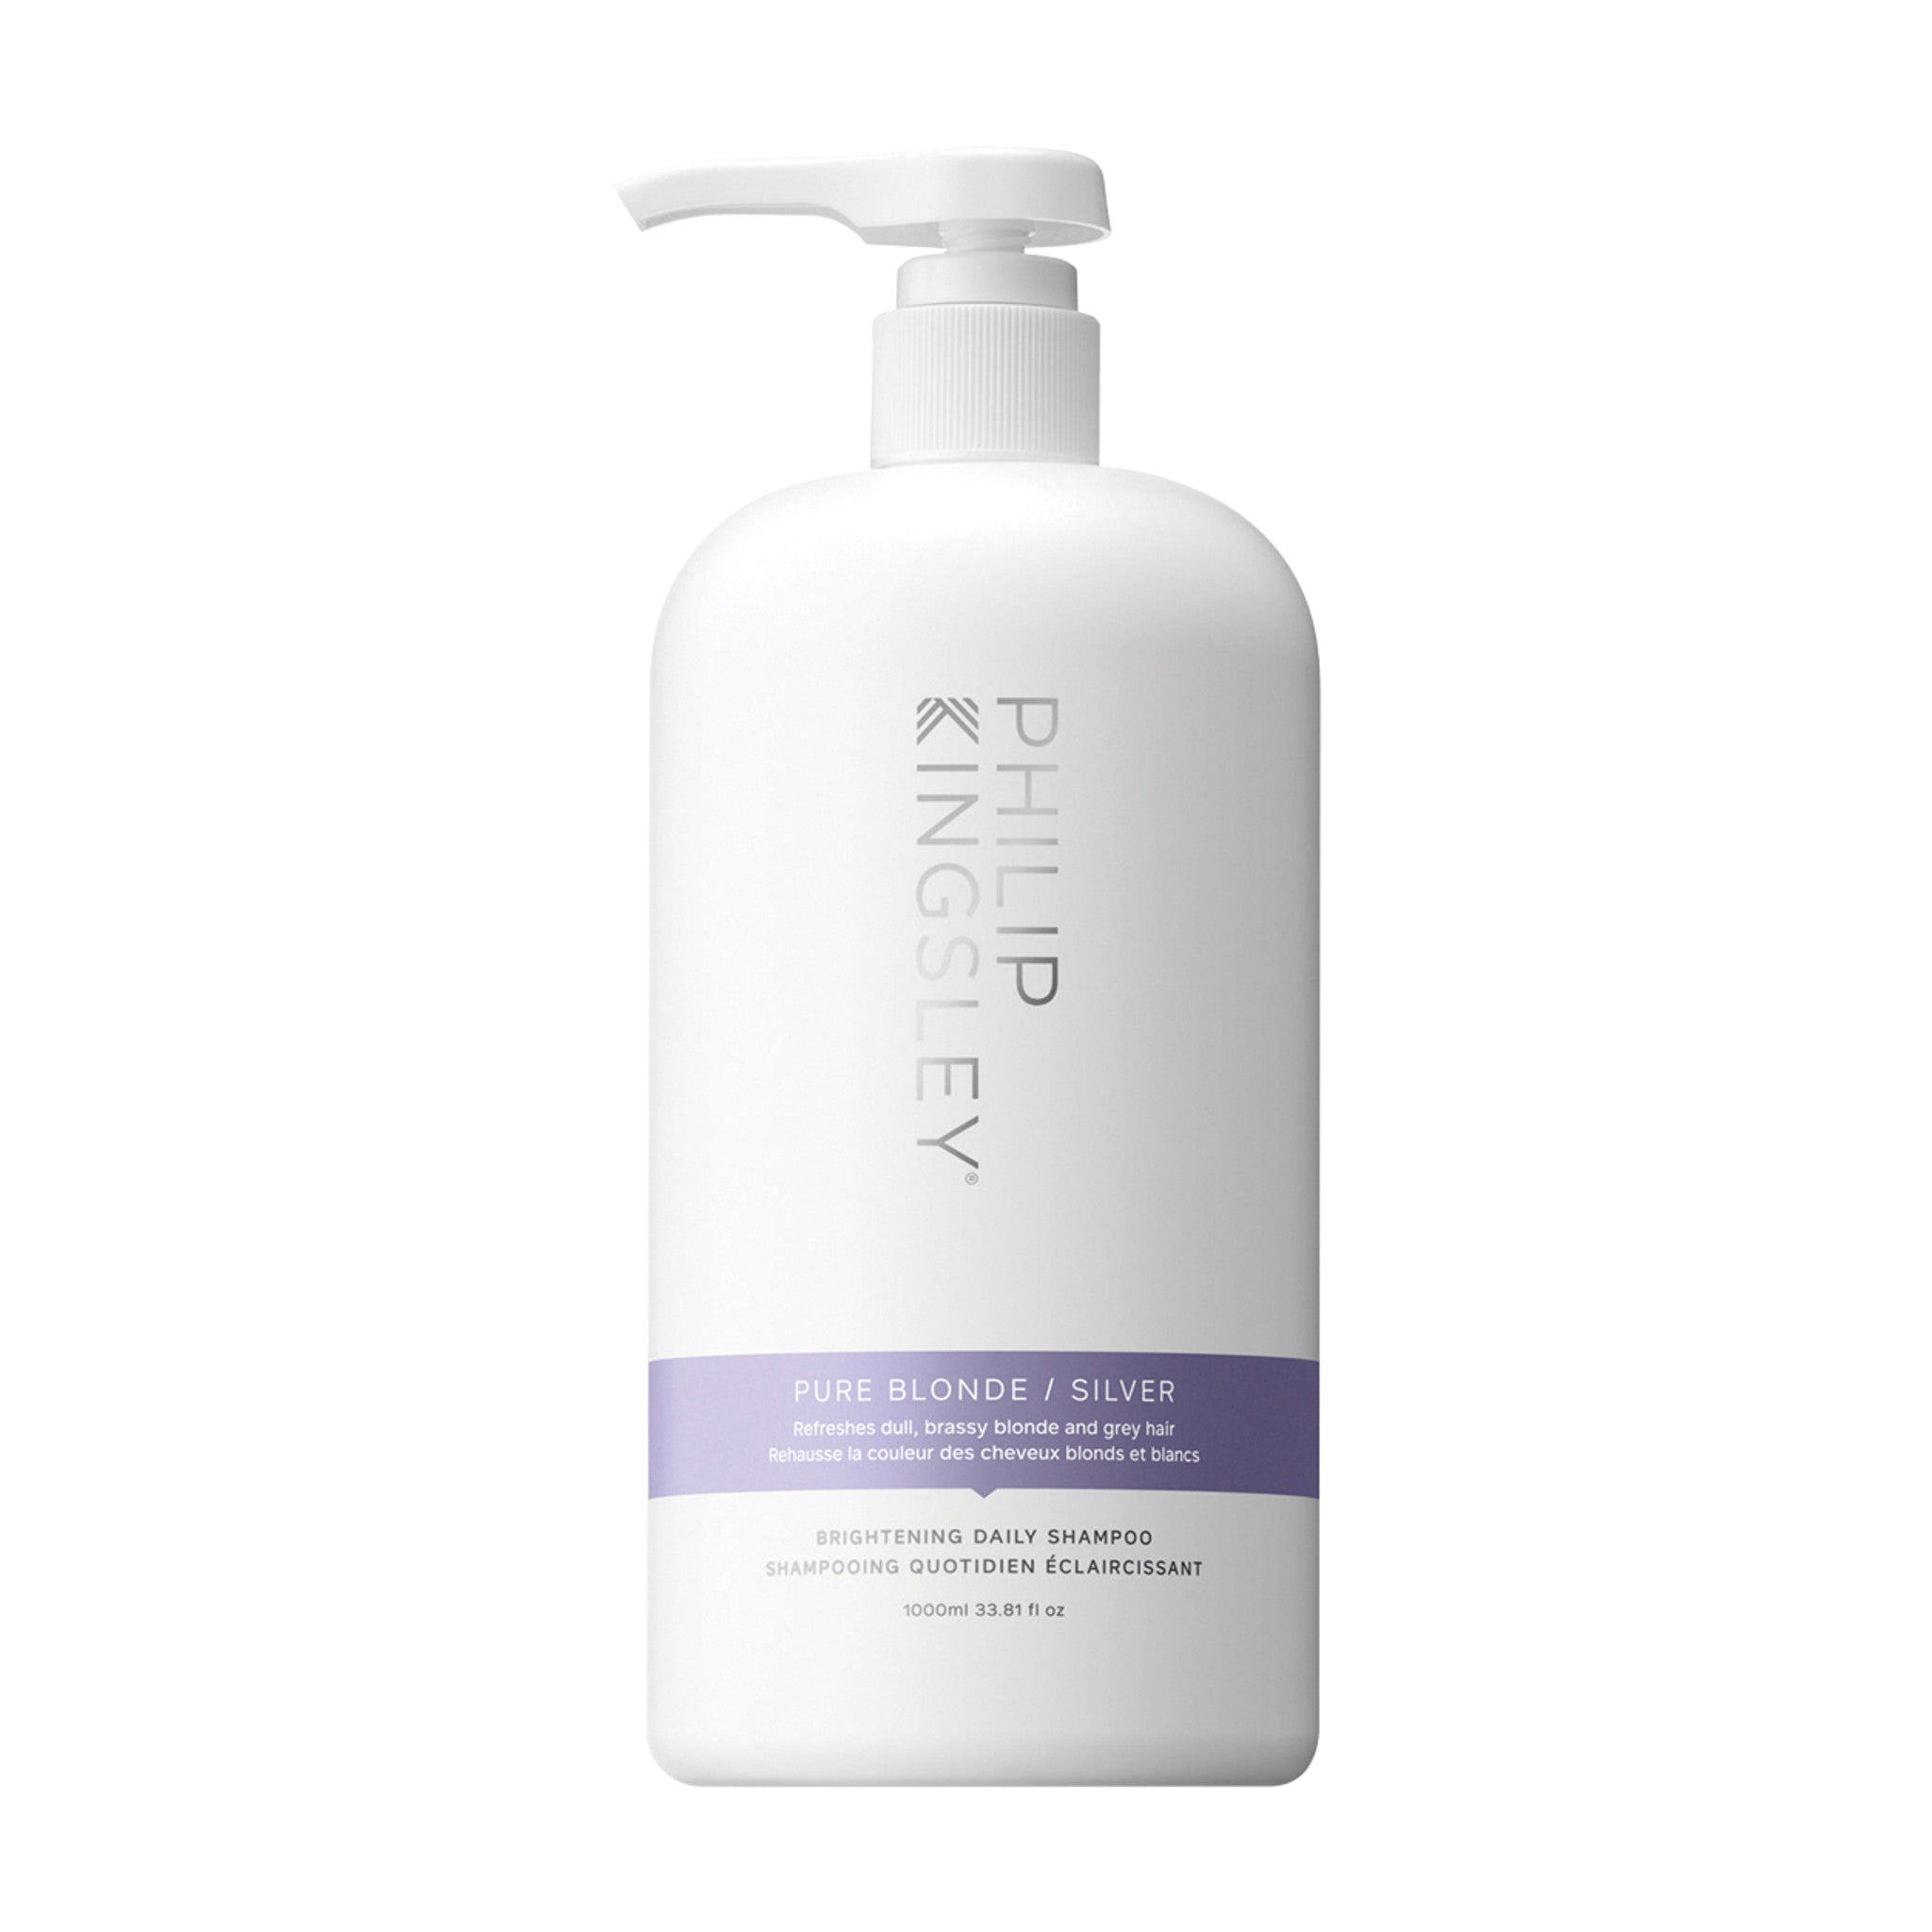 Pure Blonde/Silver Brightening Daily Shampoo main image.